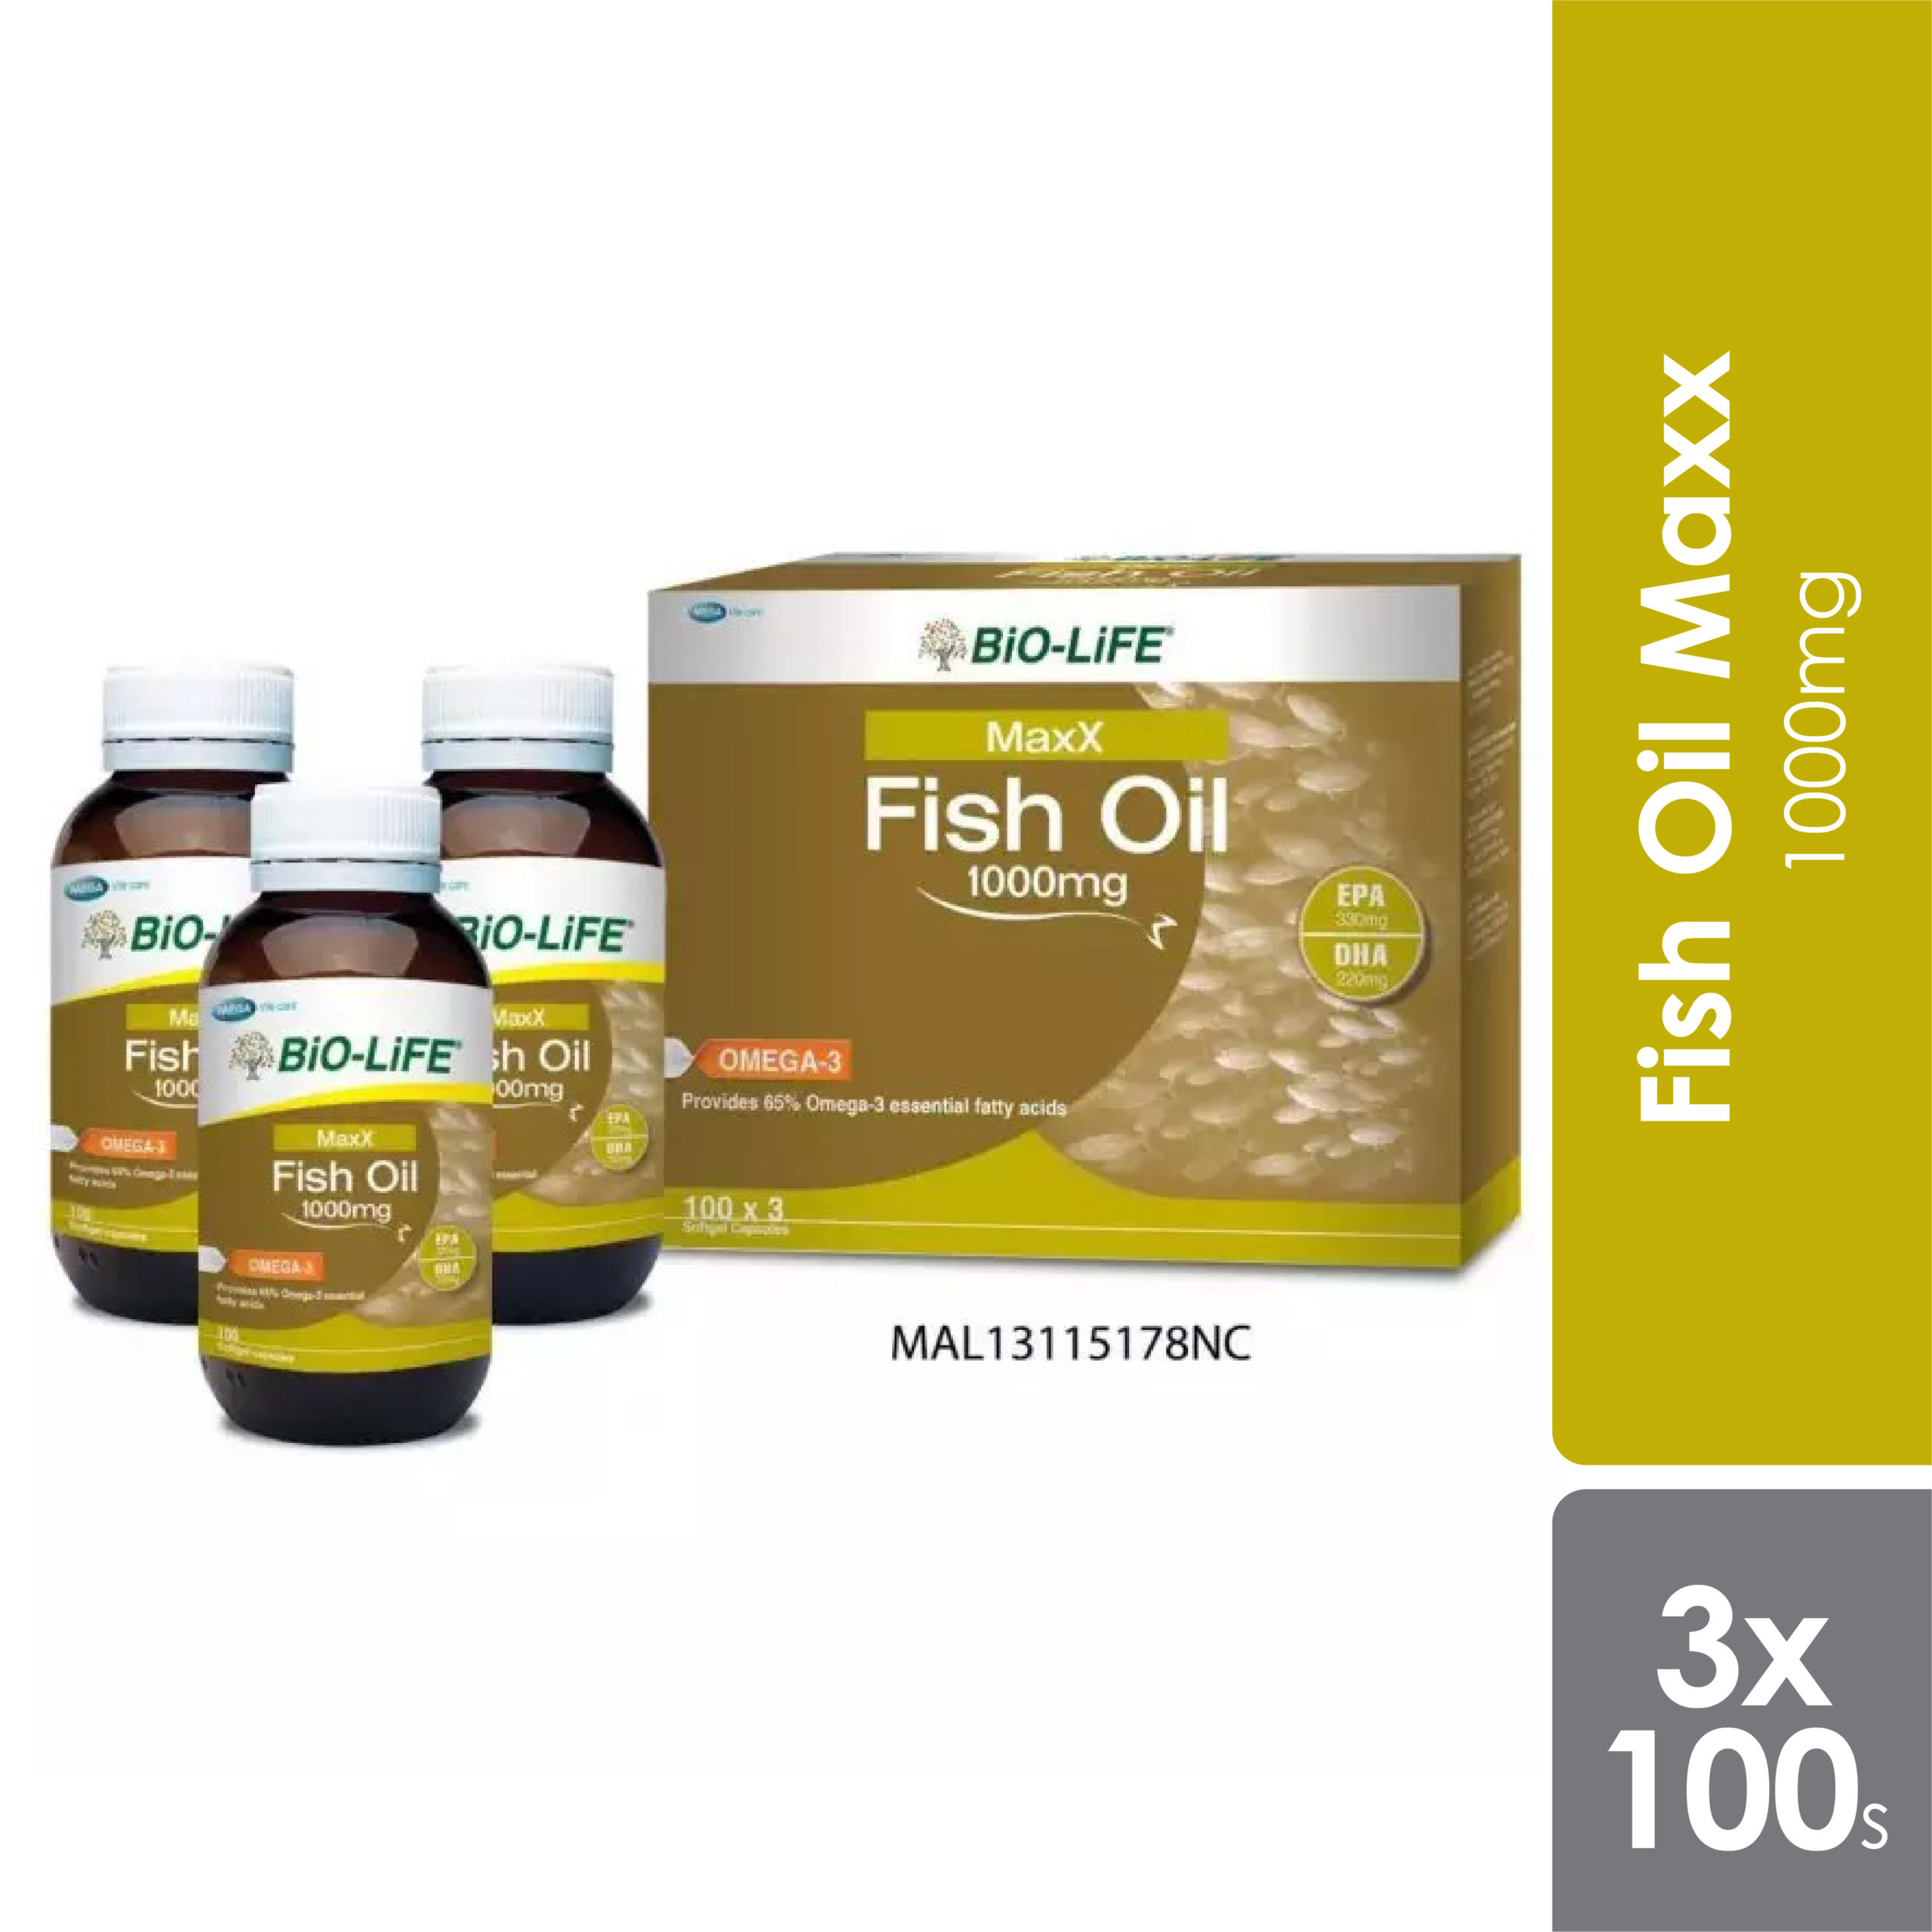 Bio Life Fish Oil / BIO-LIFE, MaxX Fish Oil 1000mg Omega-3 3x100's | Watsons ... - Online shopping for fish oil from a great selection at health & household store.